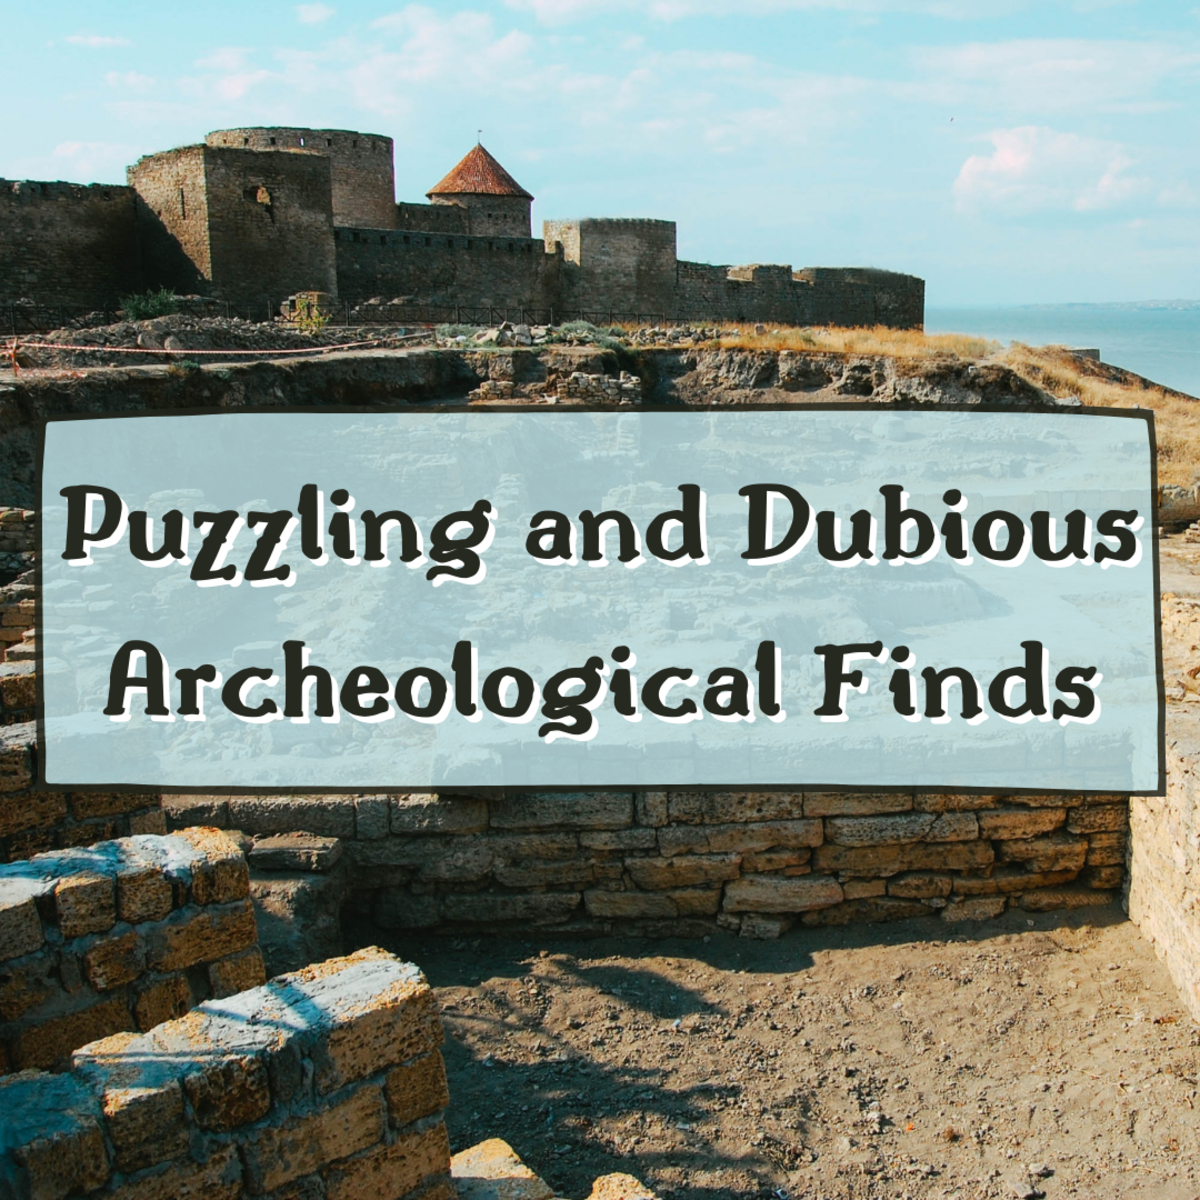 Read on to learn about three infamous archaeological mishaps.